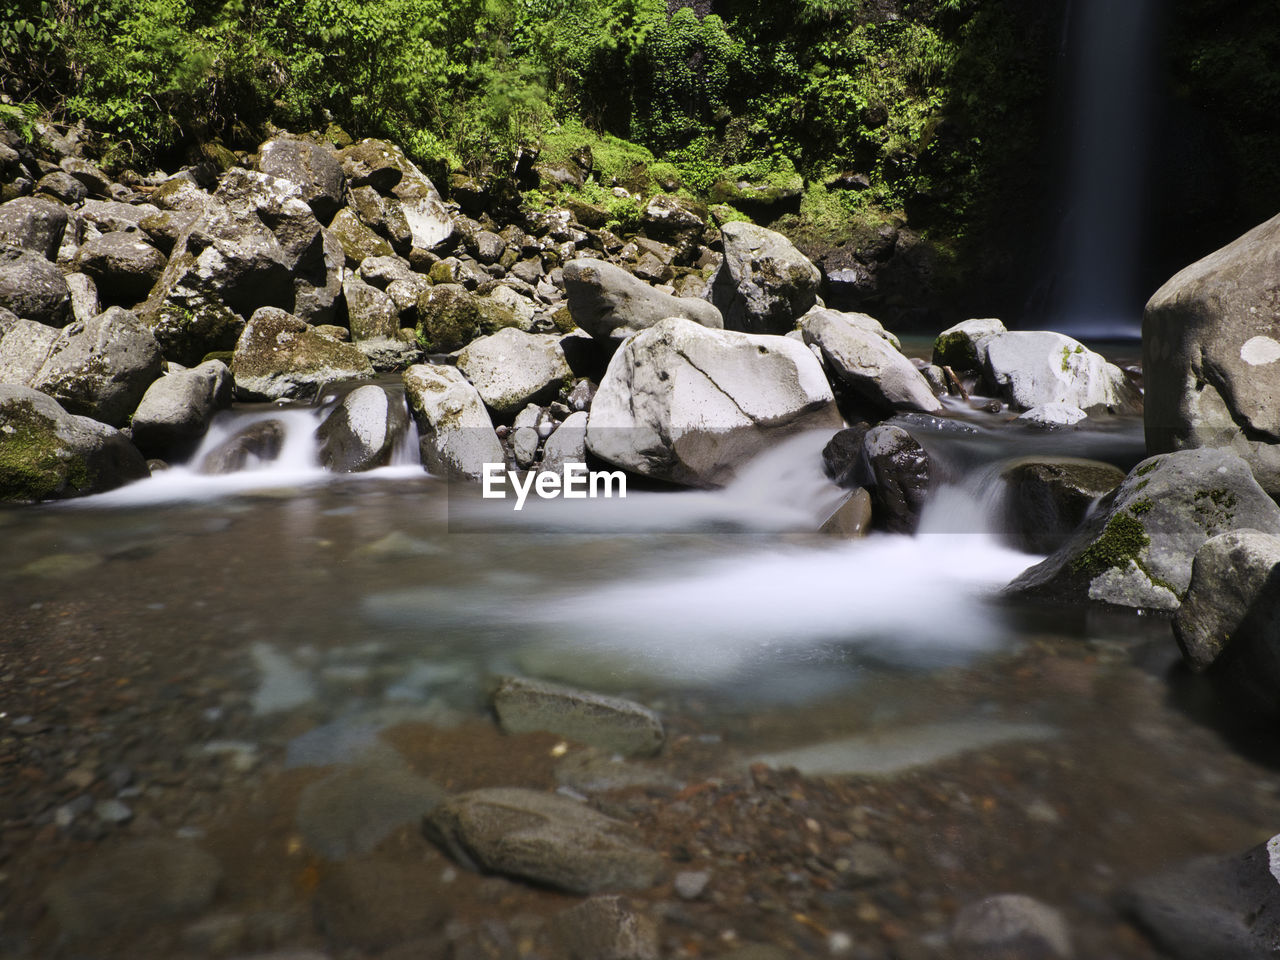 water, stream, rock, river, nature, body of water, rapid, tree, beauty in nature, plant, forest, stream bed, water feature, watercourse, scenics - nature, wilderness, creek, land, waterfall, motion, flowing water, environment, long exposure, no people, flowing, tranquility, outdoors, day, non-urban scene, tranquil scene, autumn, landscape, blurred motion, spring, leaf, stone, idyllic